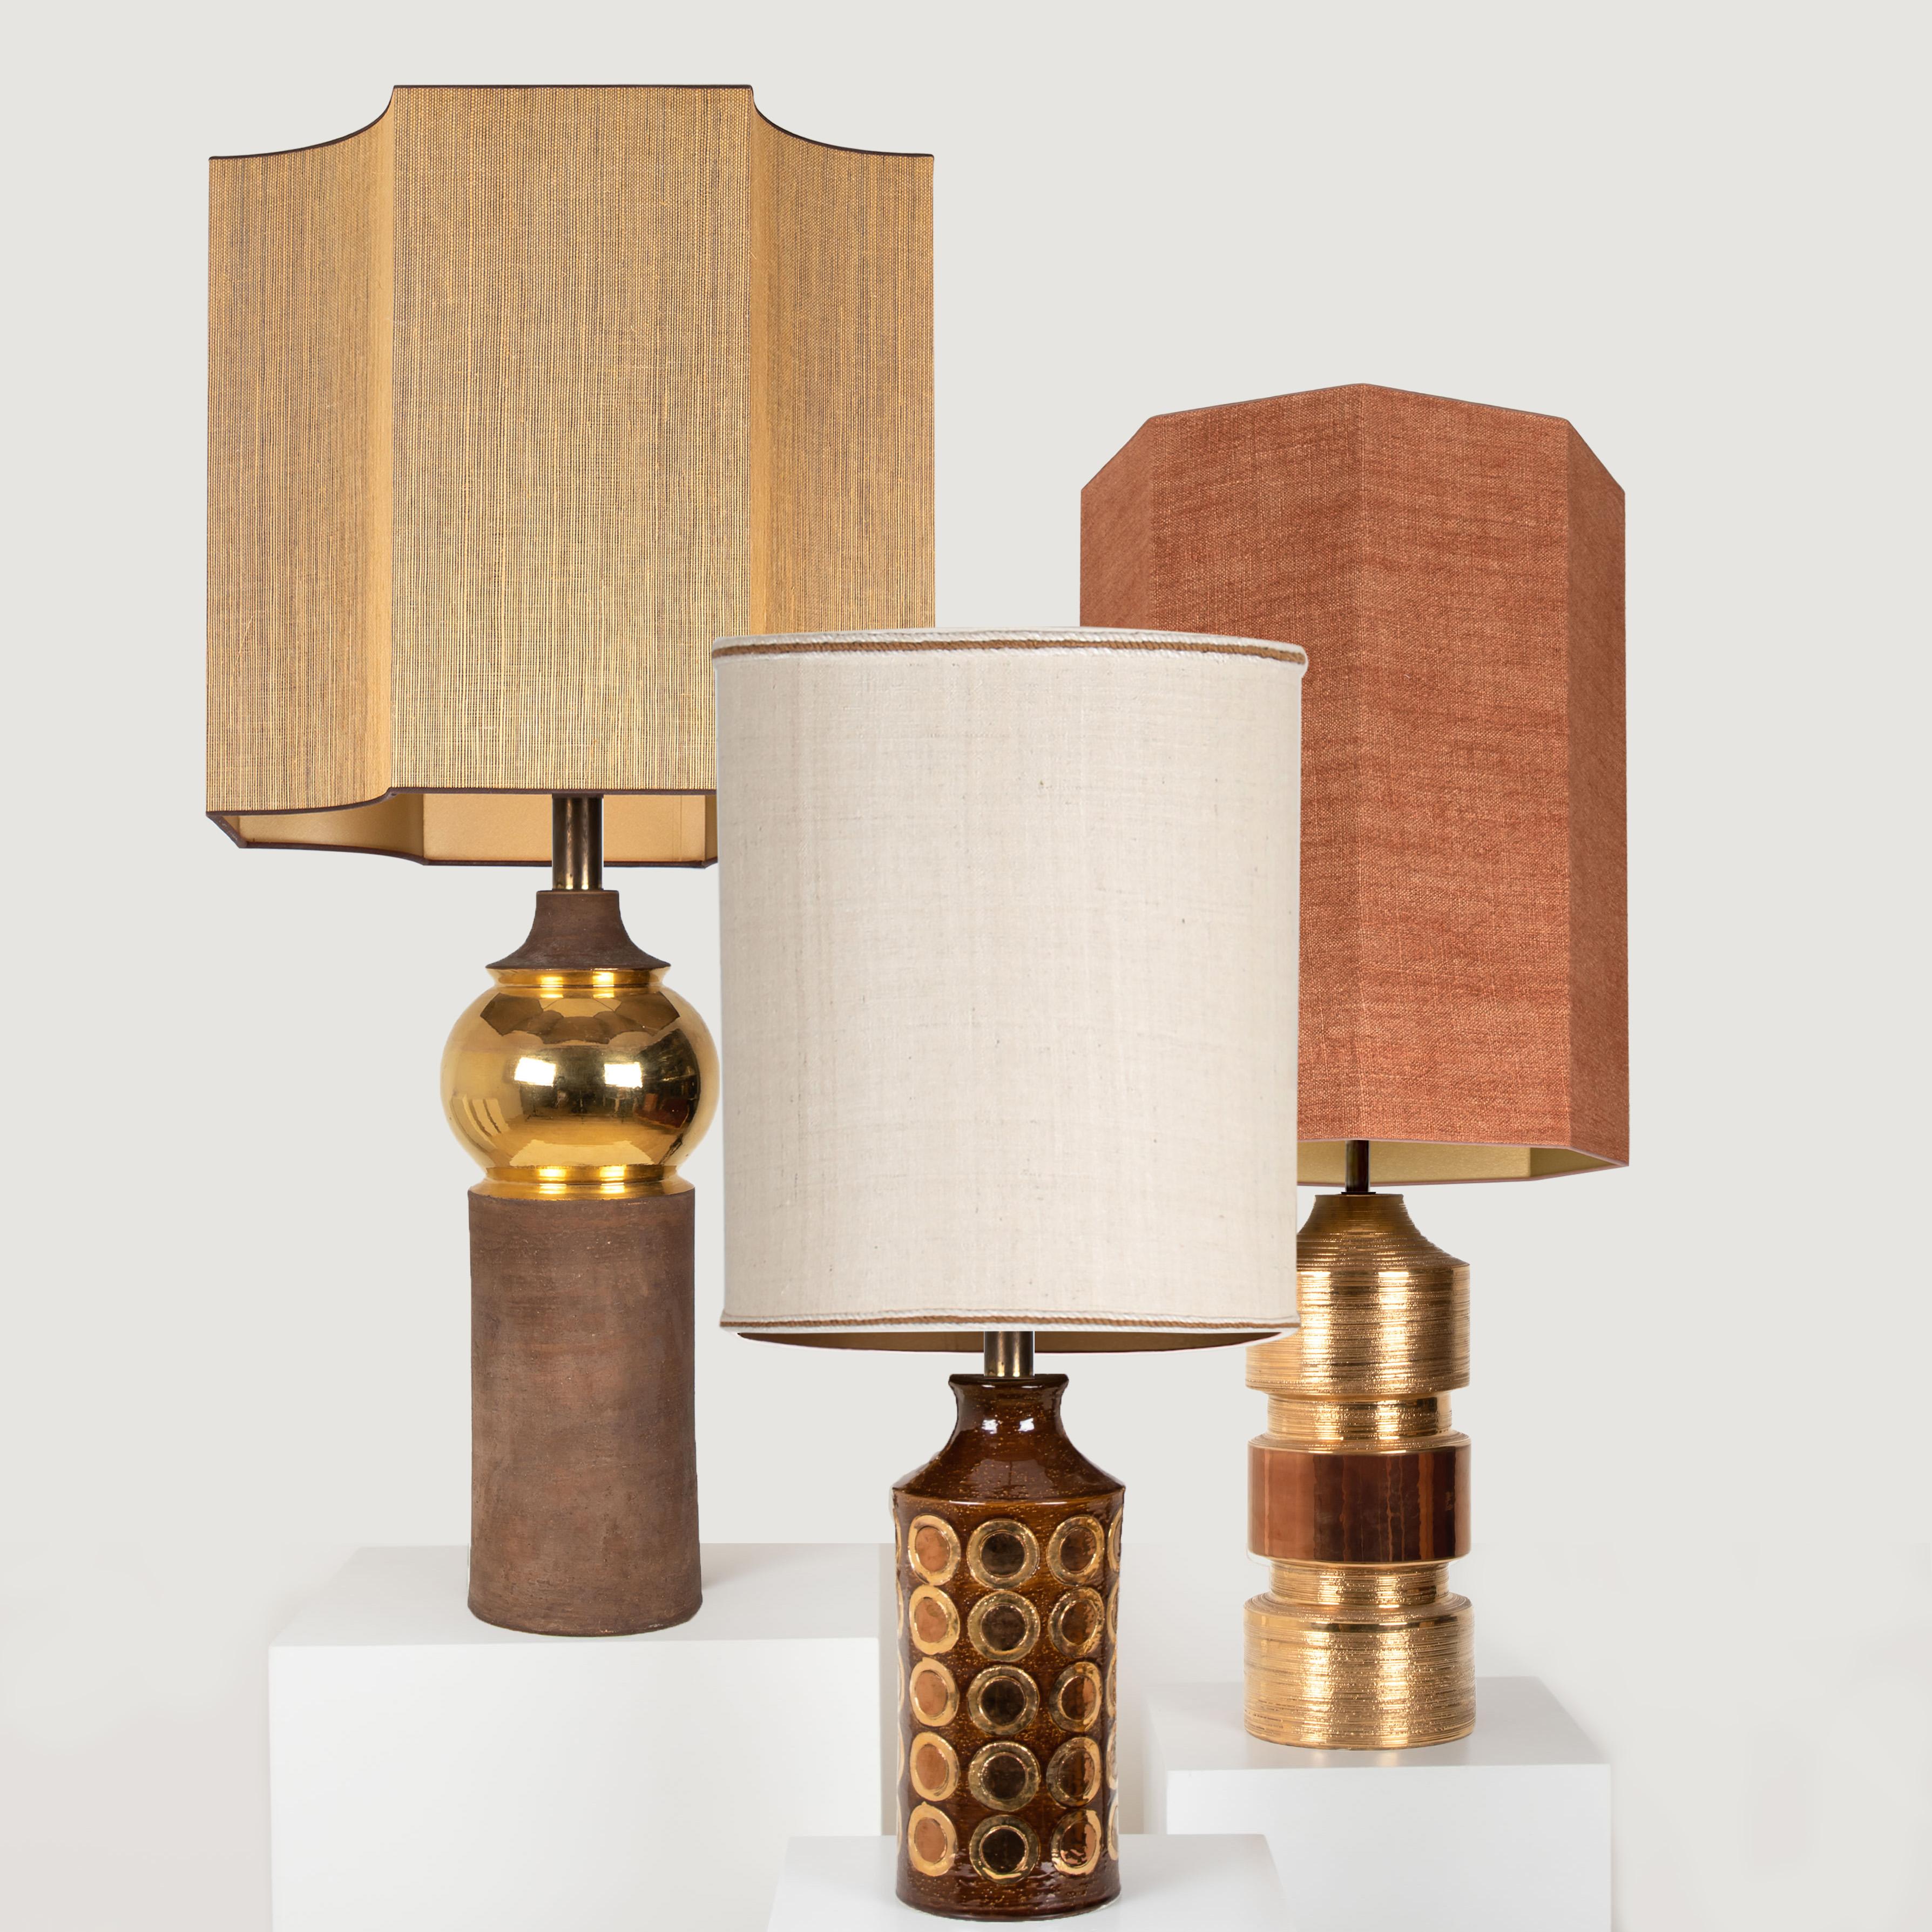 Pair of Large Bitossi Lamps for Bergboms, with Custom Made Shade by Rene Houben 1